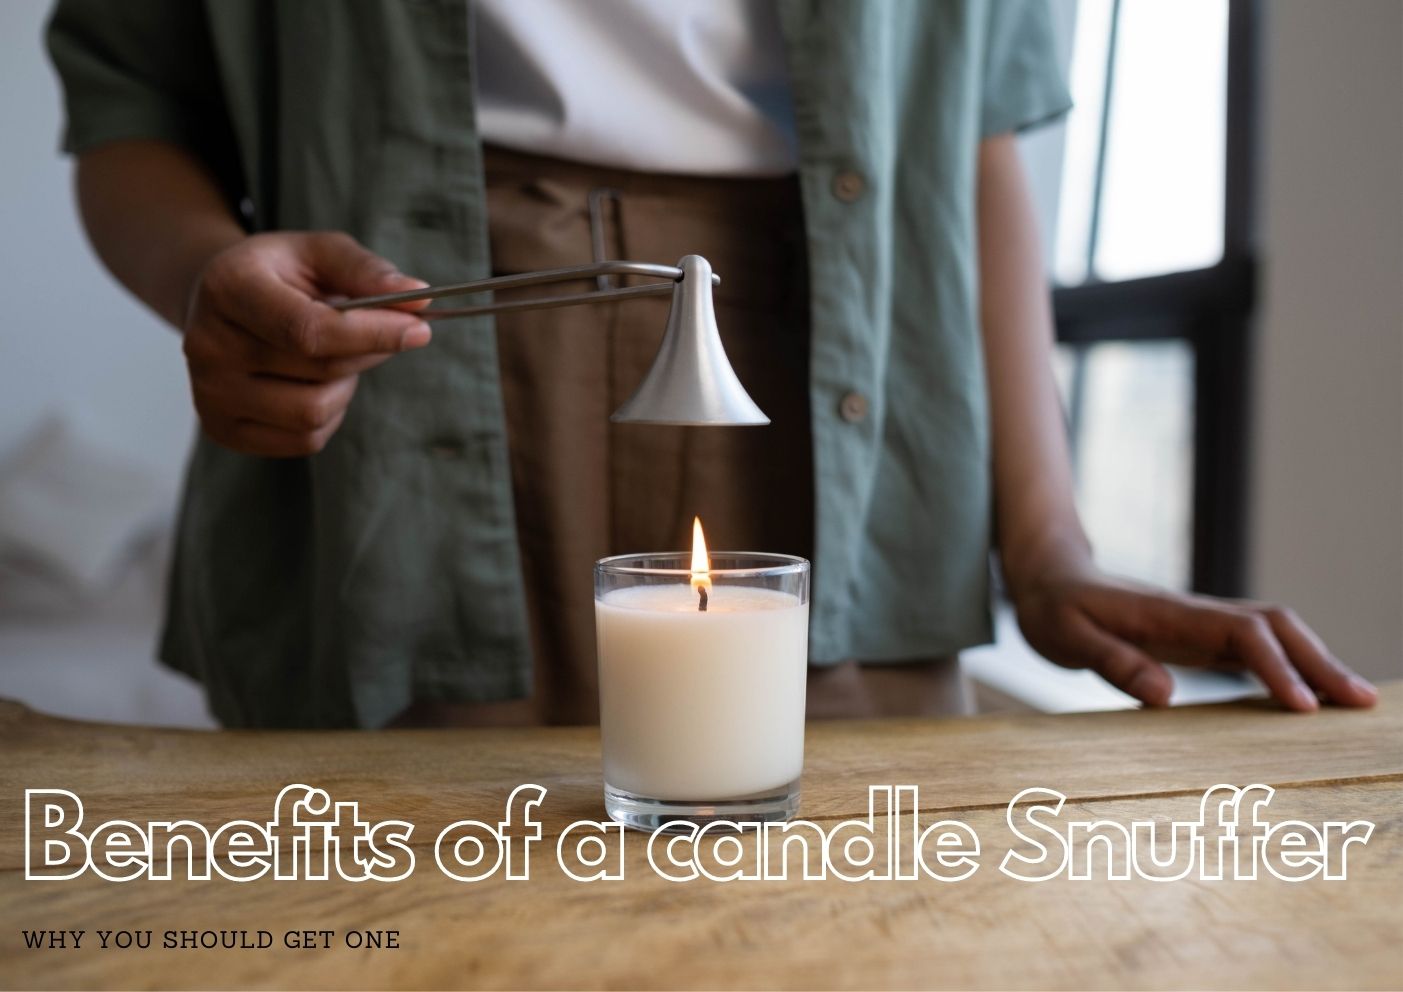 Why use a candle snuffer?